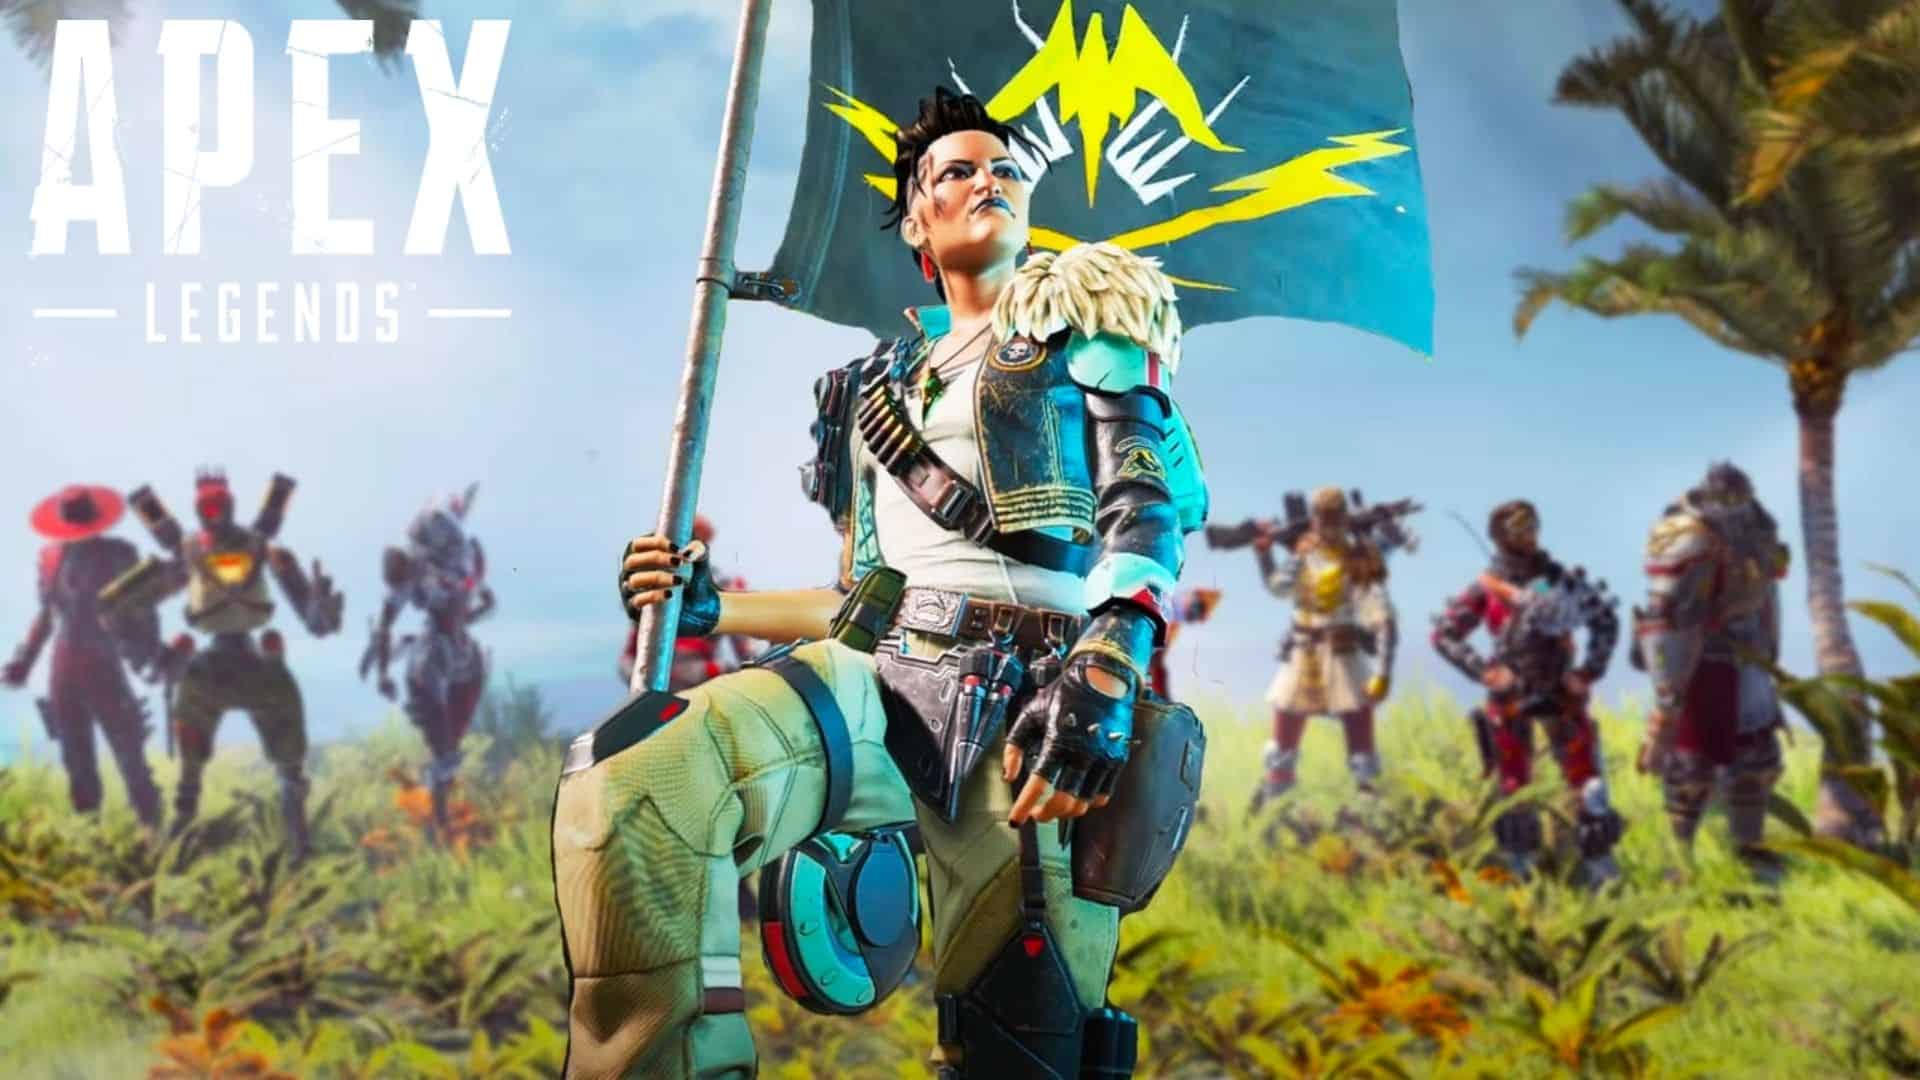 Mad Maggie planting blue and yellow flag in Apex Legends amongst her fellow legends